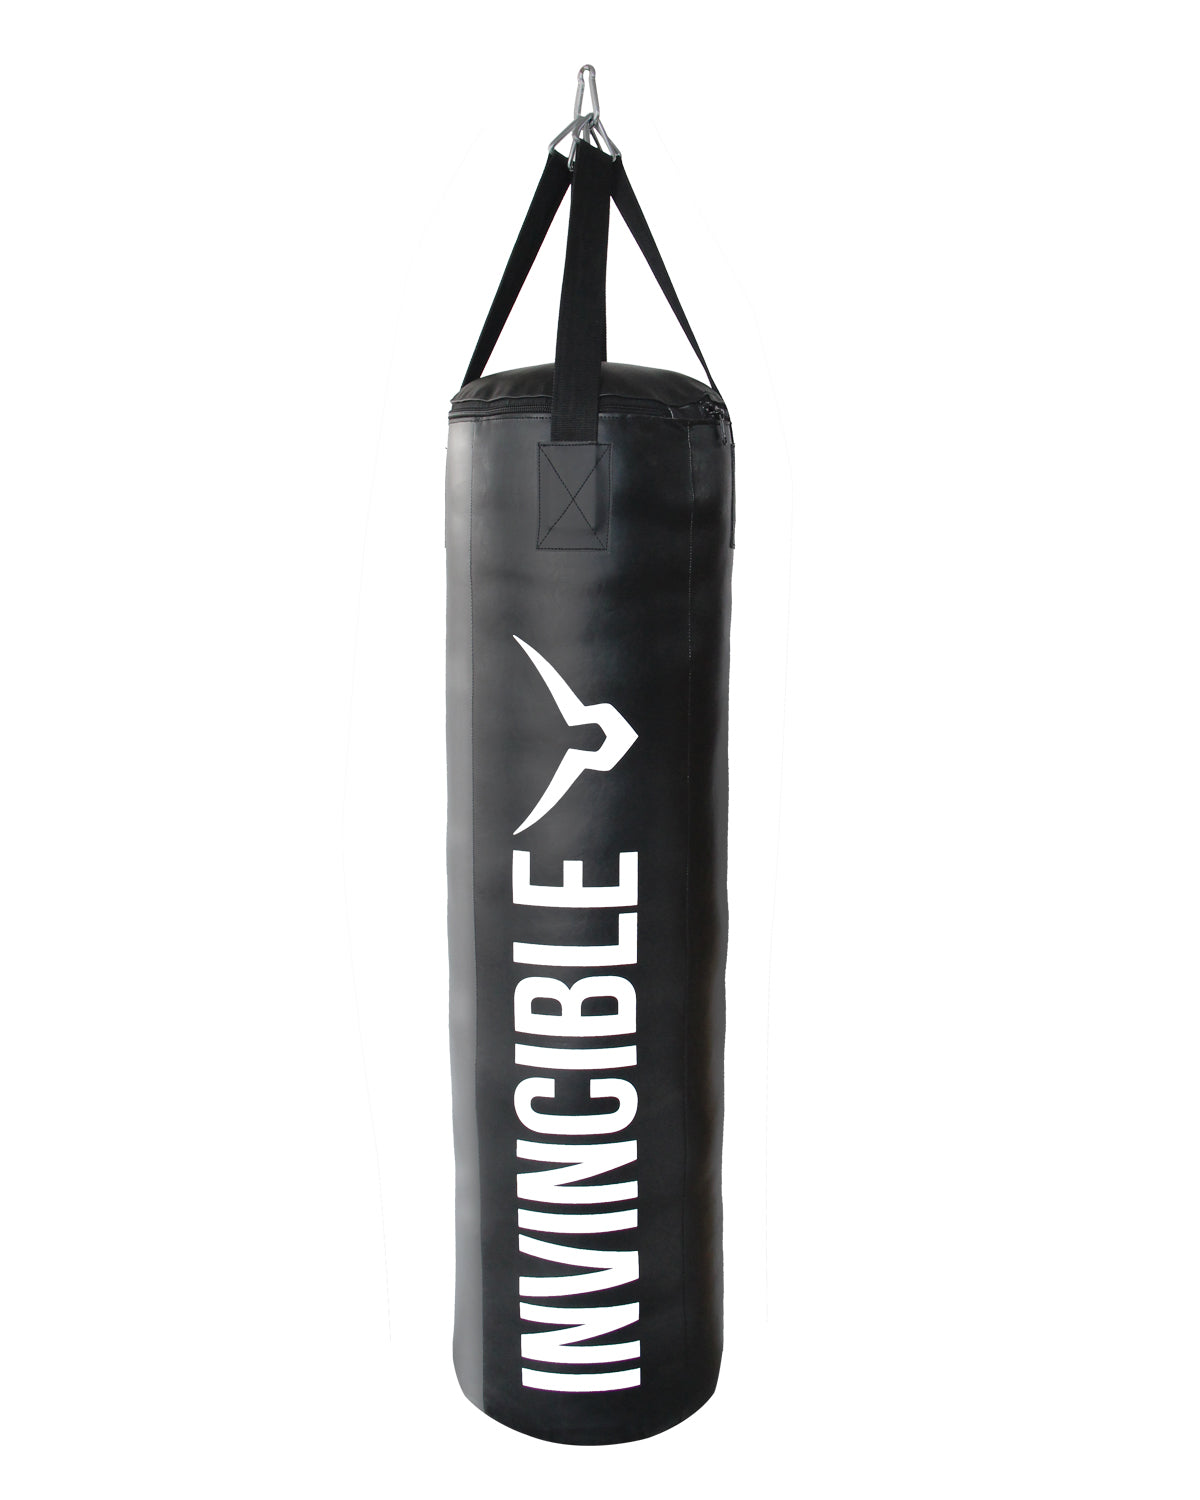 3 Benefits Of Using A Punching Bag | Why You Should Add Boxing As Part Of  Your Workout - YouTube